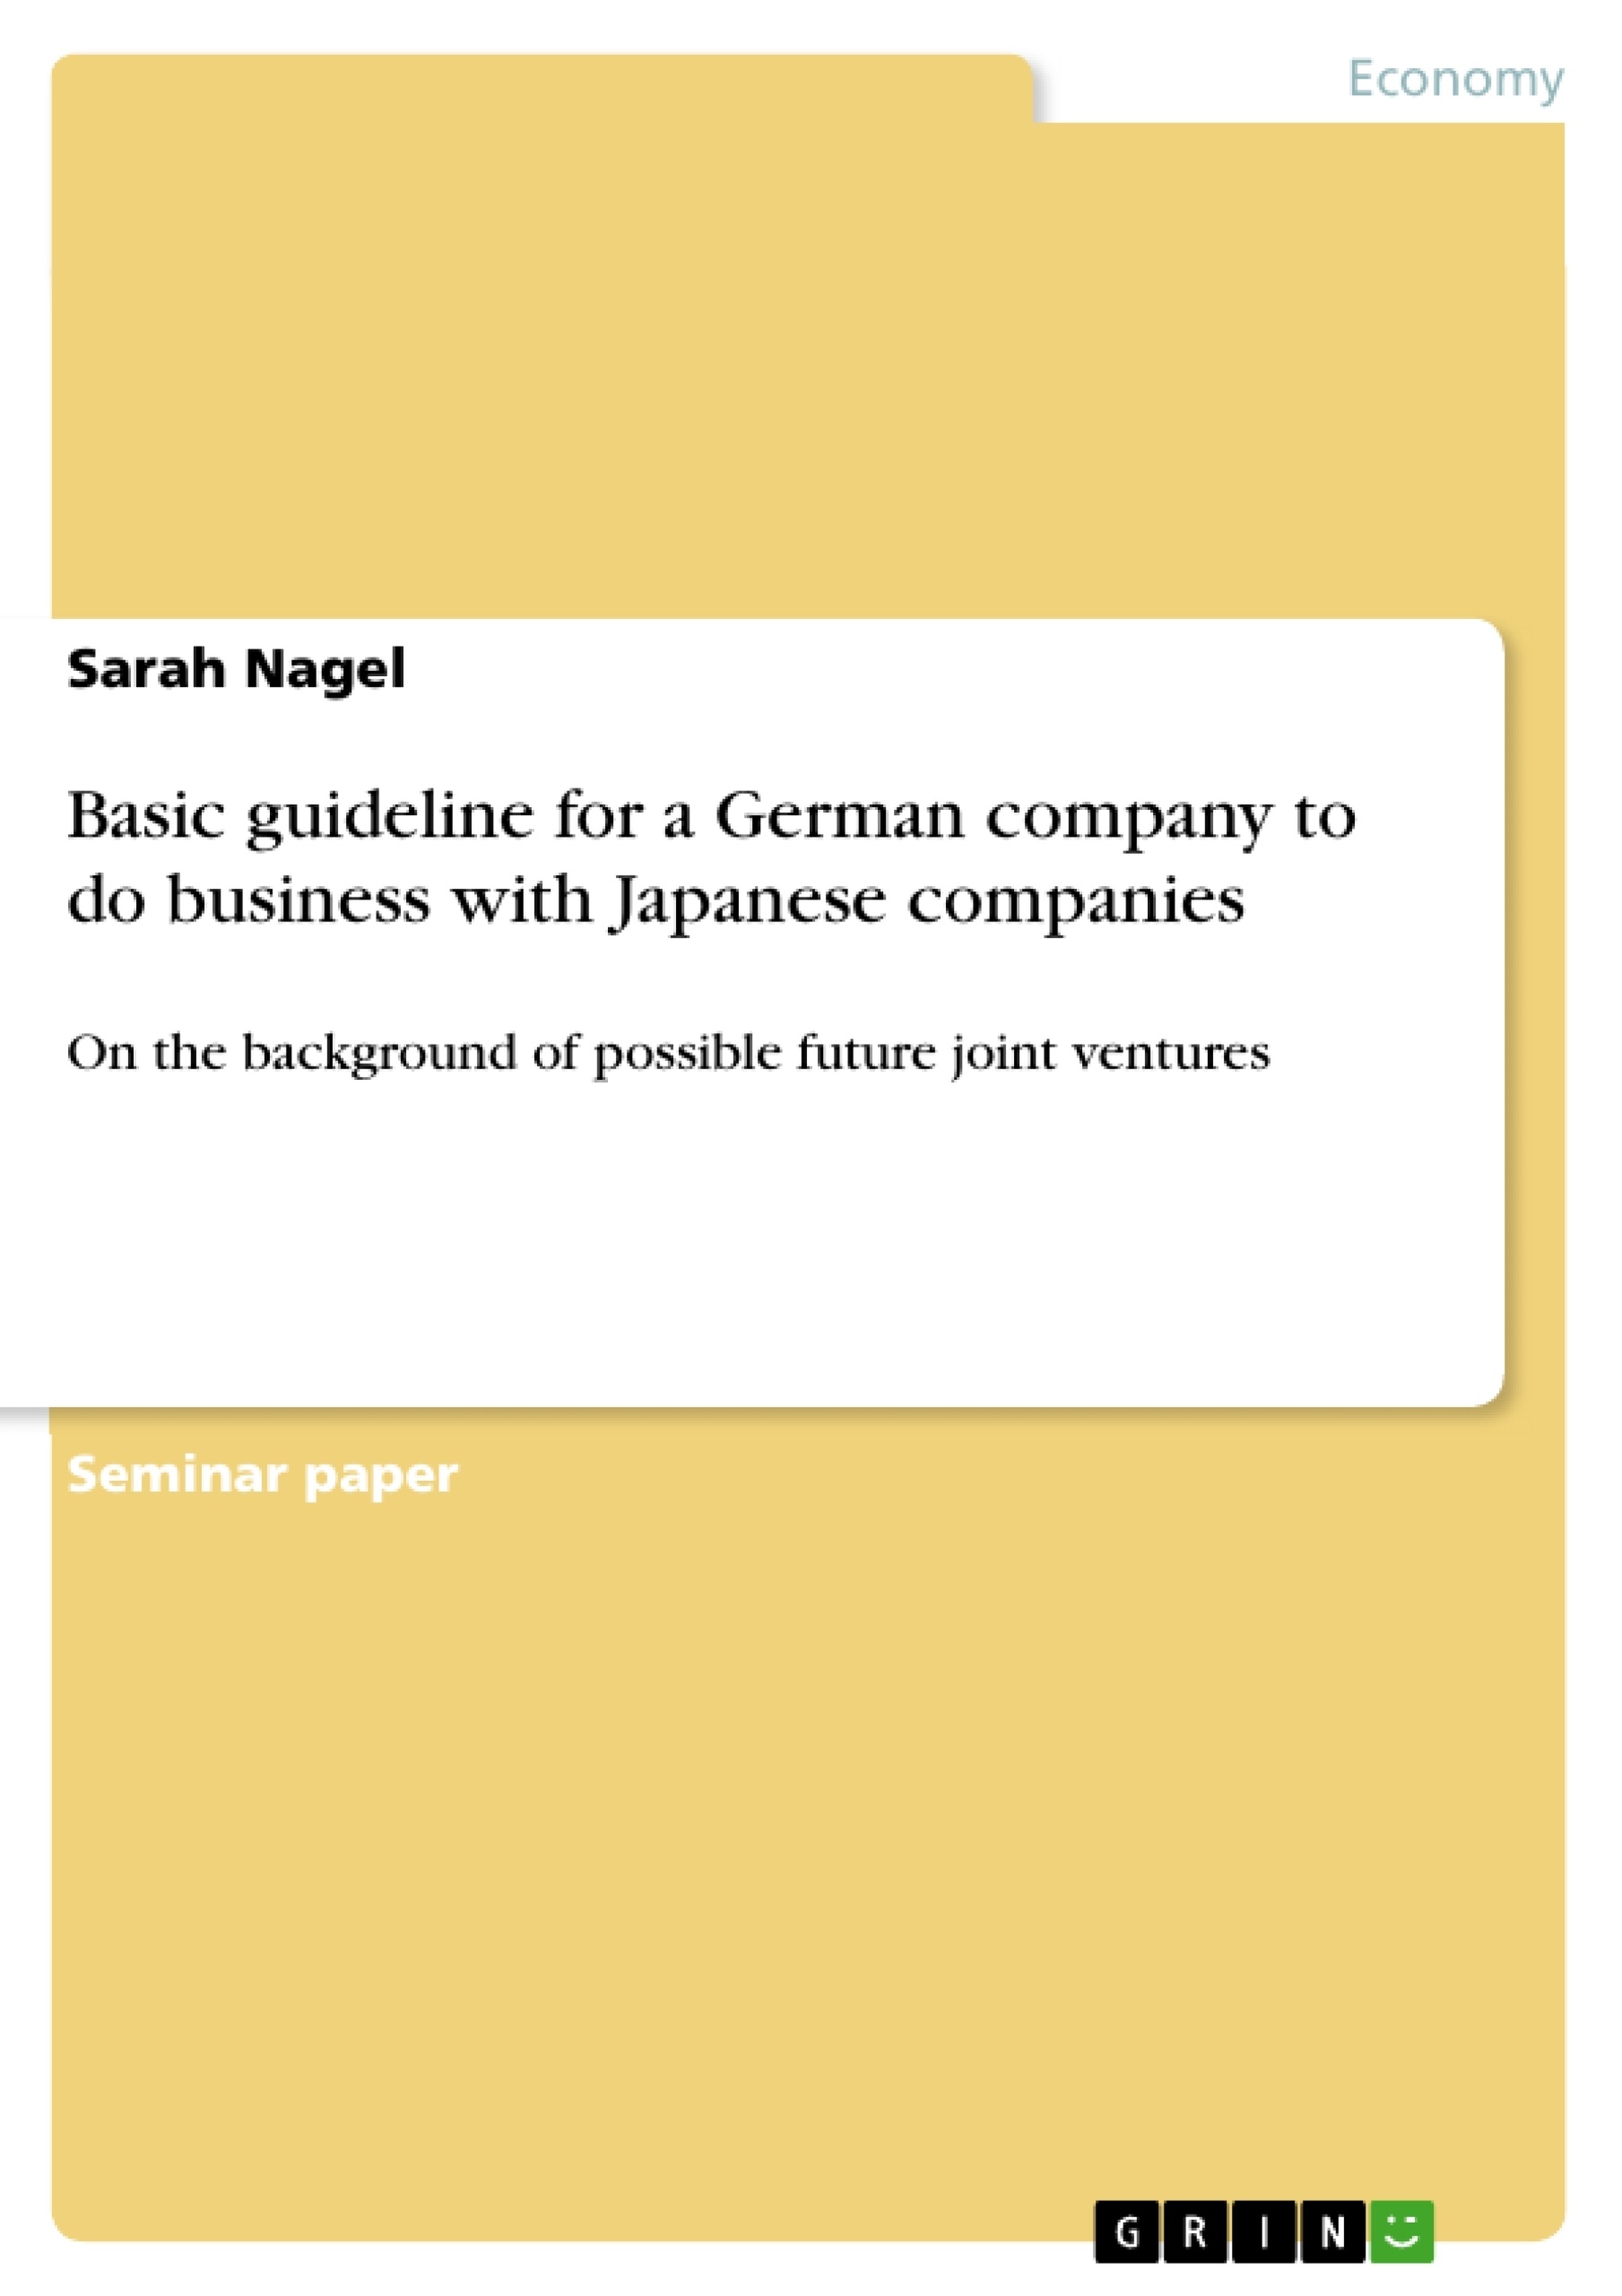 Título: Basic guideline for a German company to do business with Japanese companies